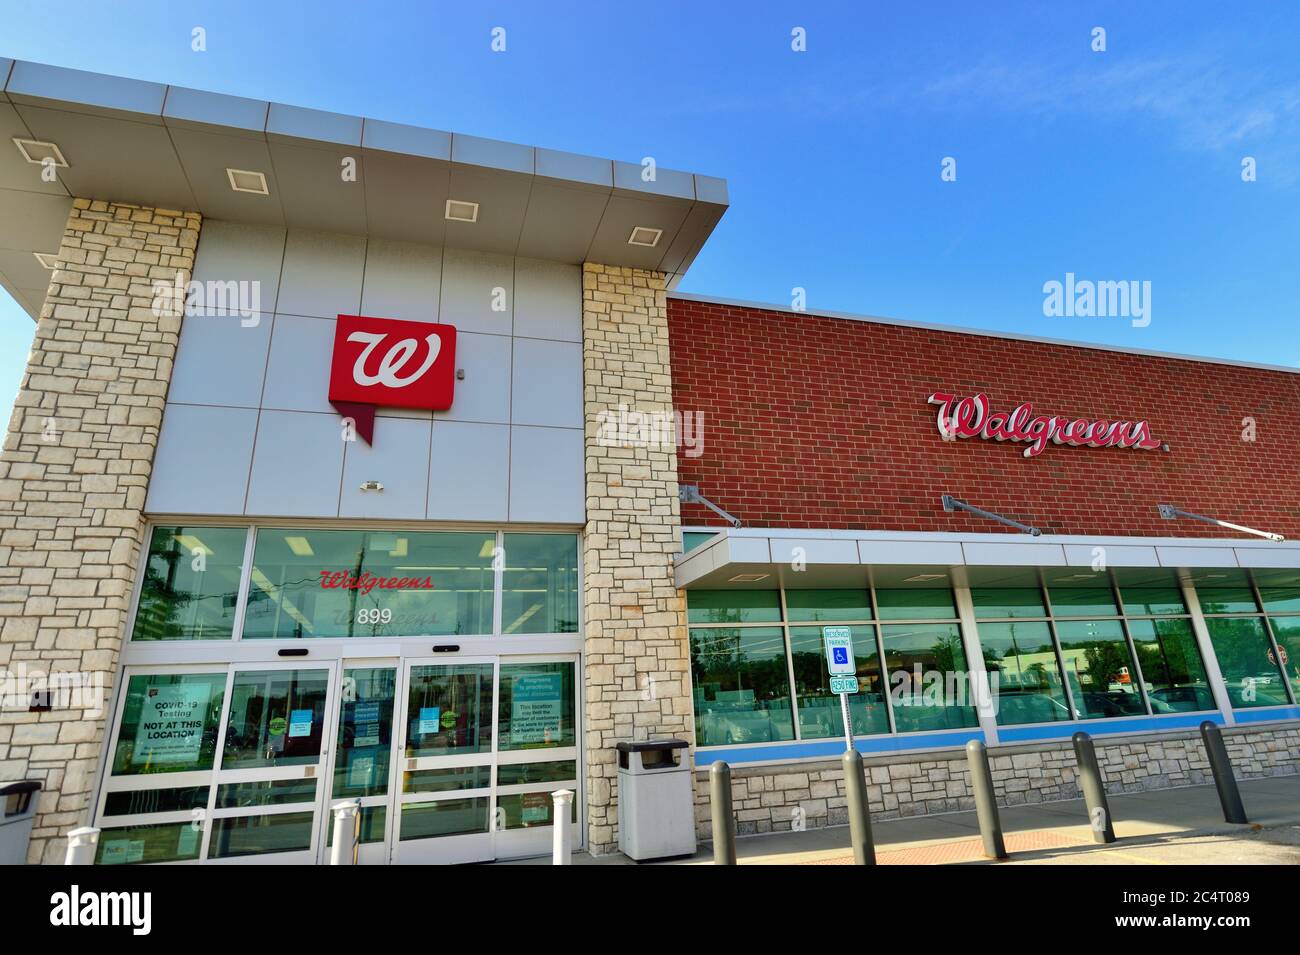 Bartlett, Illinois, USA. A Walgreens drug store in suburban Chicago. Walgreens maintains in excess of 9,000 store locations in the United States. Stock Photo